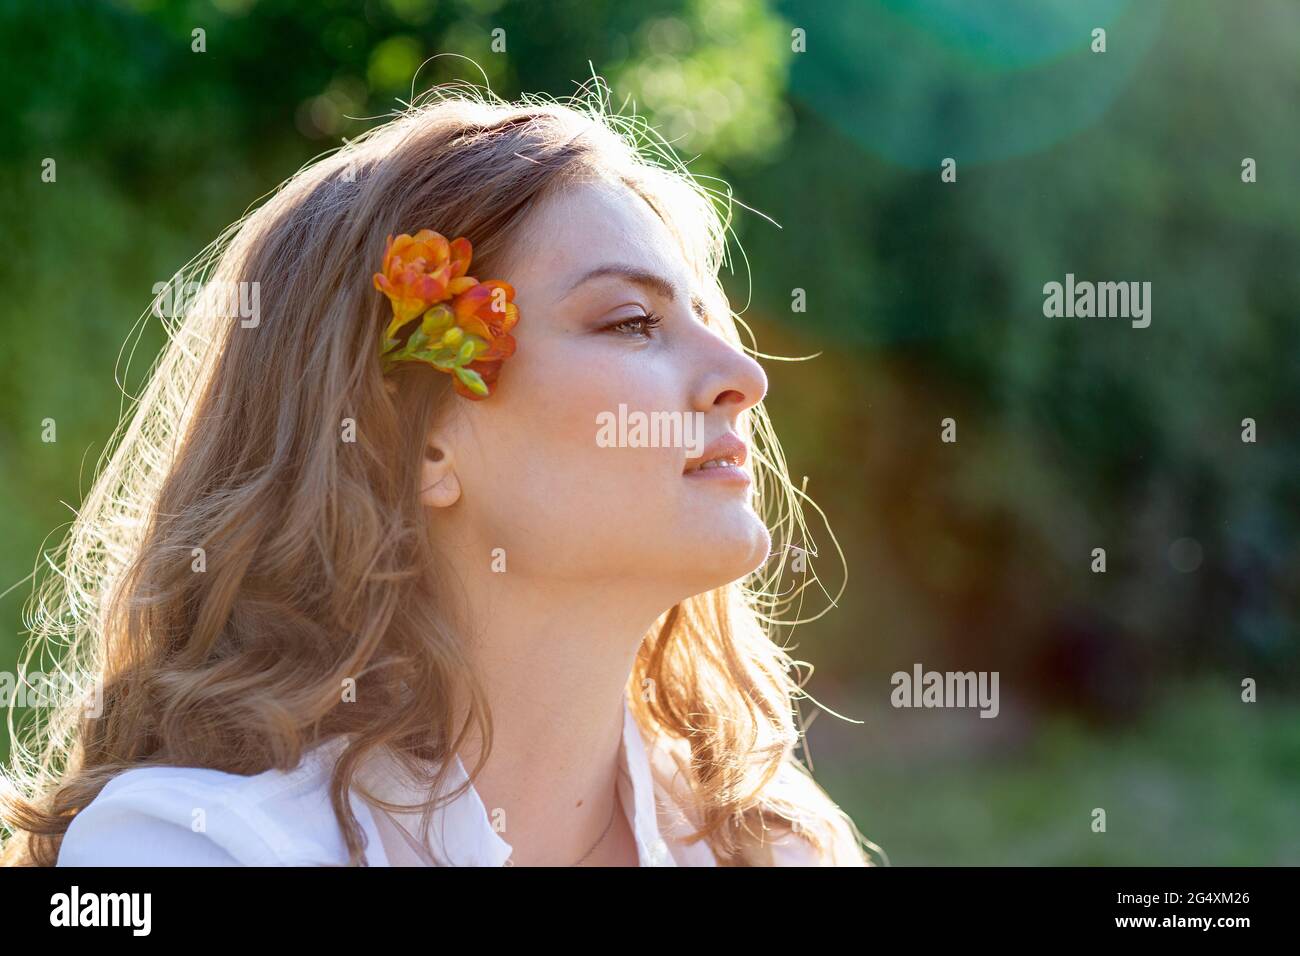 Beautiful young woman with blond hair wearing freesia flower looking away Stock Photo